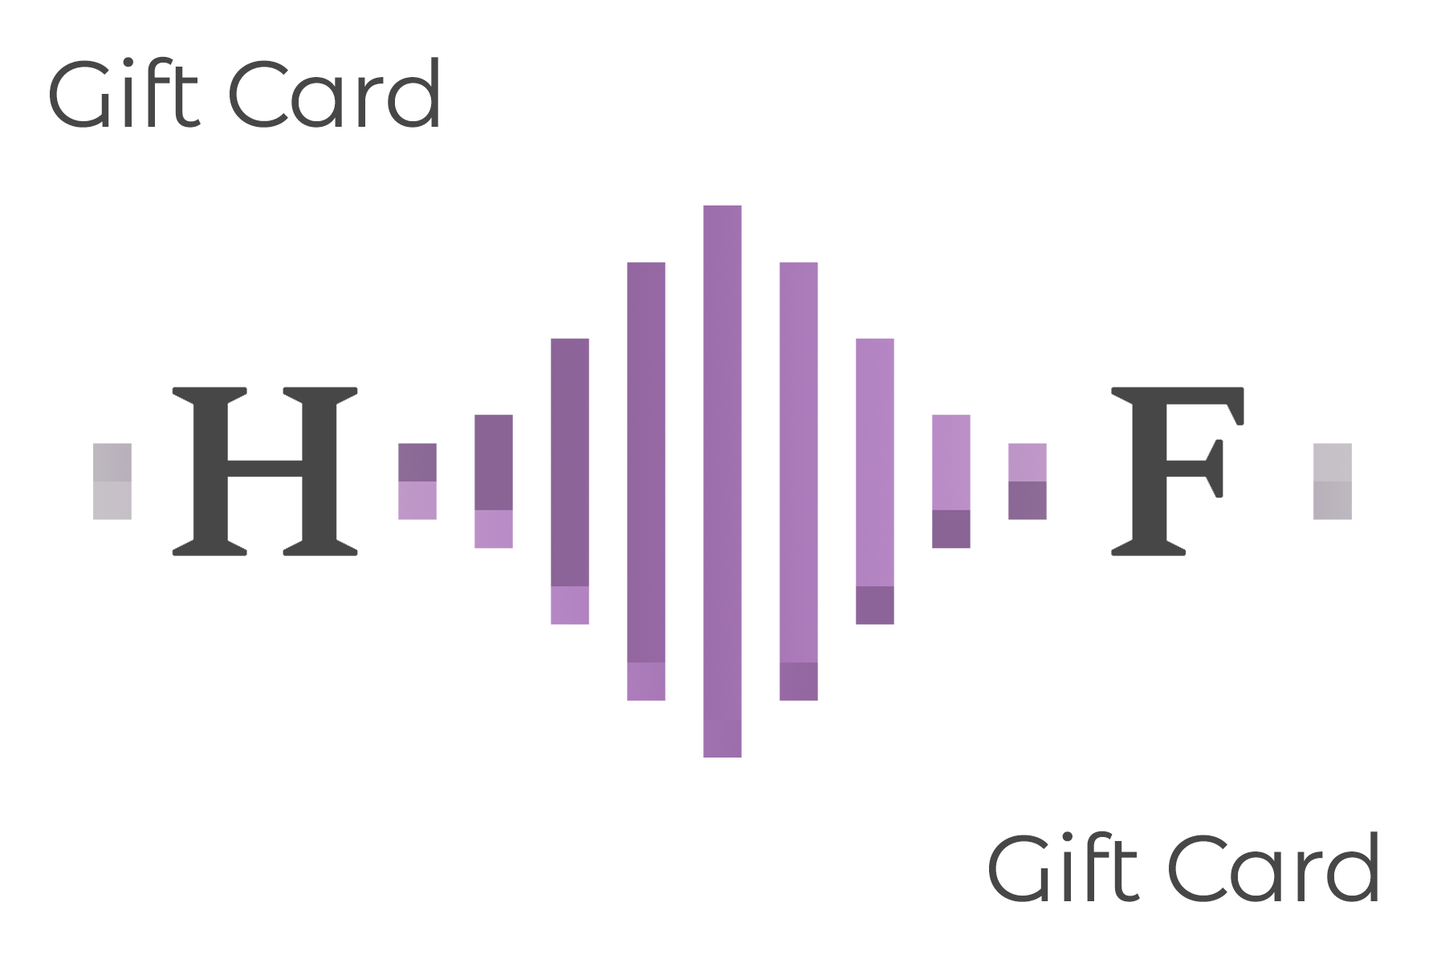 Higher Frequencies Gift Card